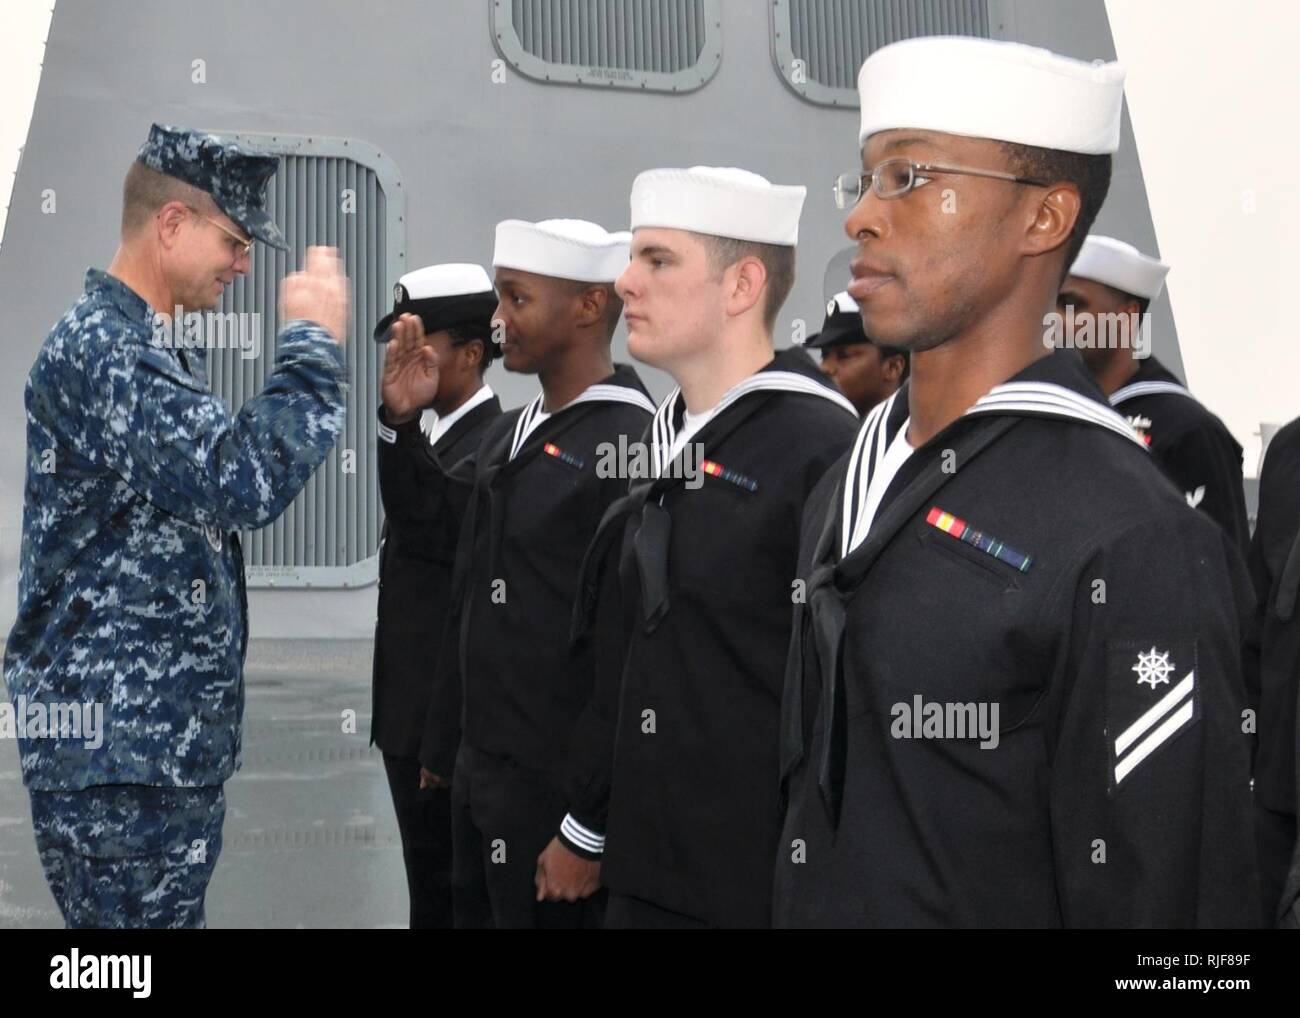 PASCAGOULA, Miss. (Feb. 6, 2013)  Quartermaster Seaman Apprentice Rashaun Plowden renders a salute to Cmdr. Darren Nelson, commanding officer of the amphibious transport dock ship Pre-Commissioning Unit (PCU) Arlington (LPD 24) during a uniform inspection. Arlington is named for Arlington County, Va., home of the Pentagon, in honor of the 184 people killed at the Pentagon during the Sept. 11, 2001 terrorist attacks. Stock Photo